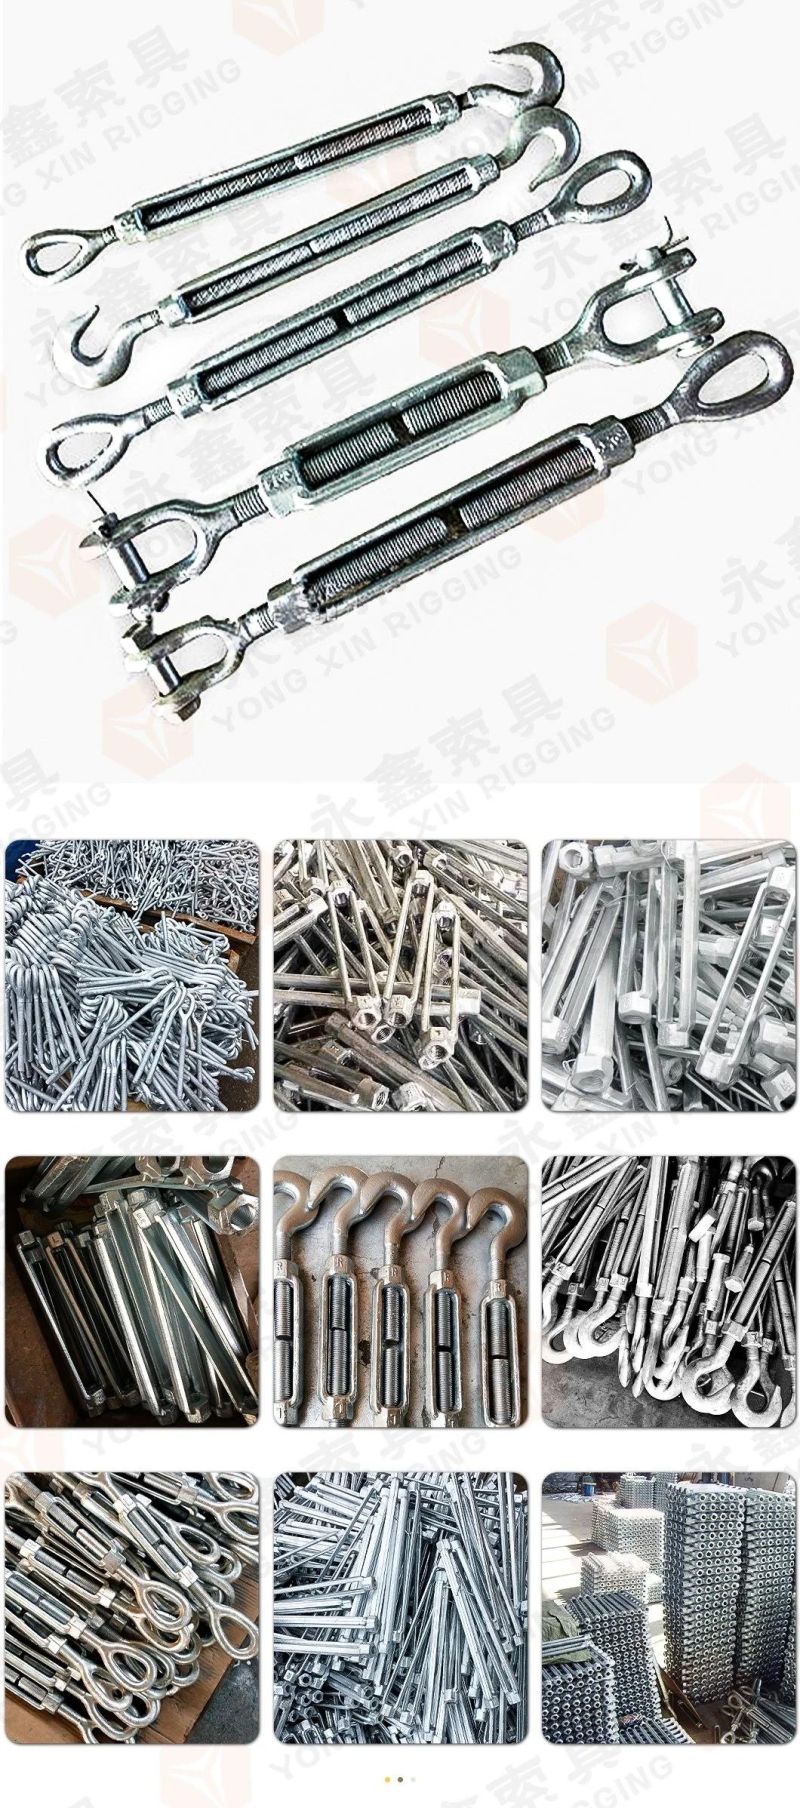 Hot Selling Stainless Steel Size Mini Heavy Duty Swageless Wall Bracing Turnbuckle